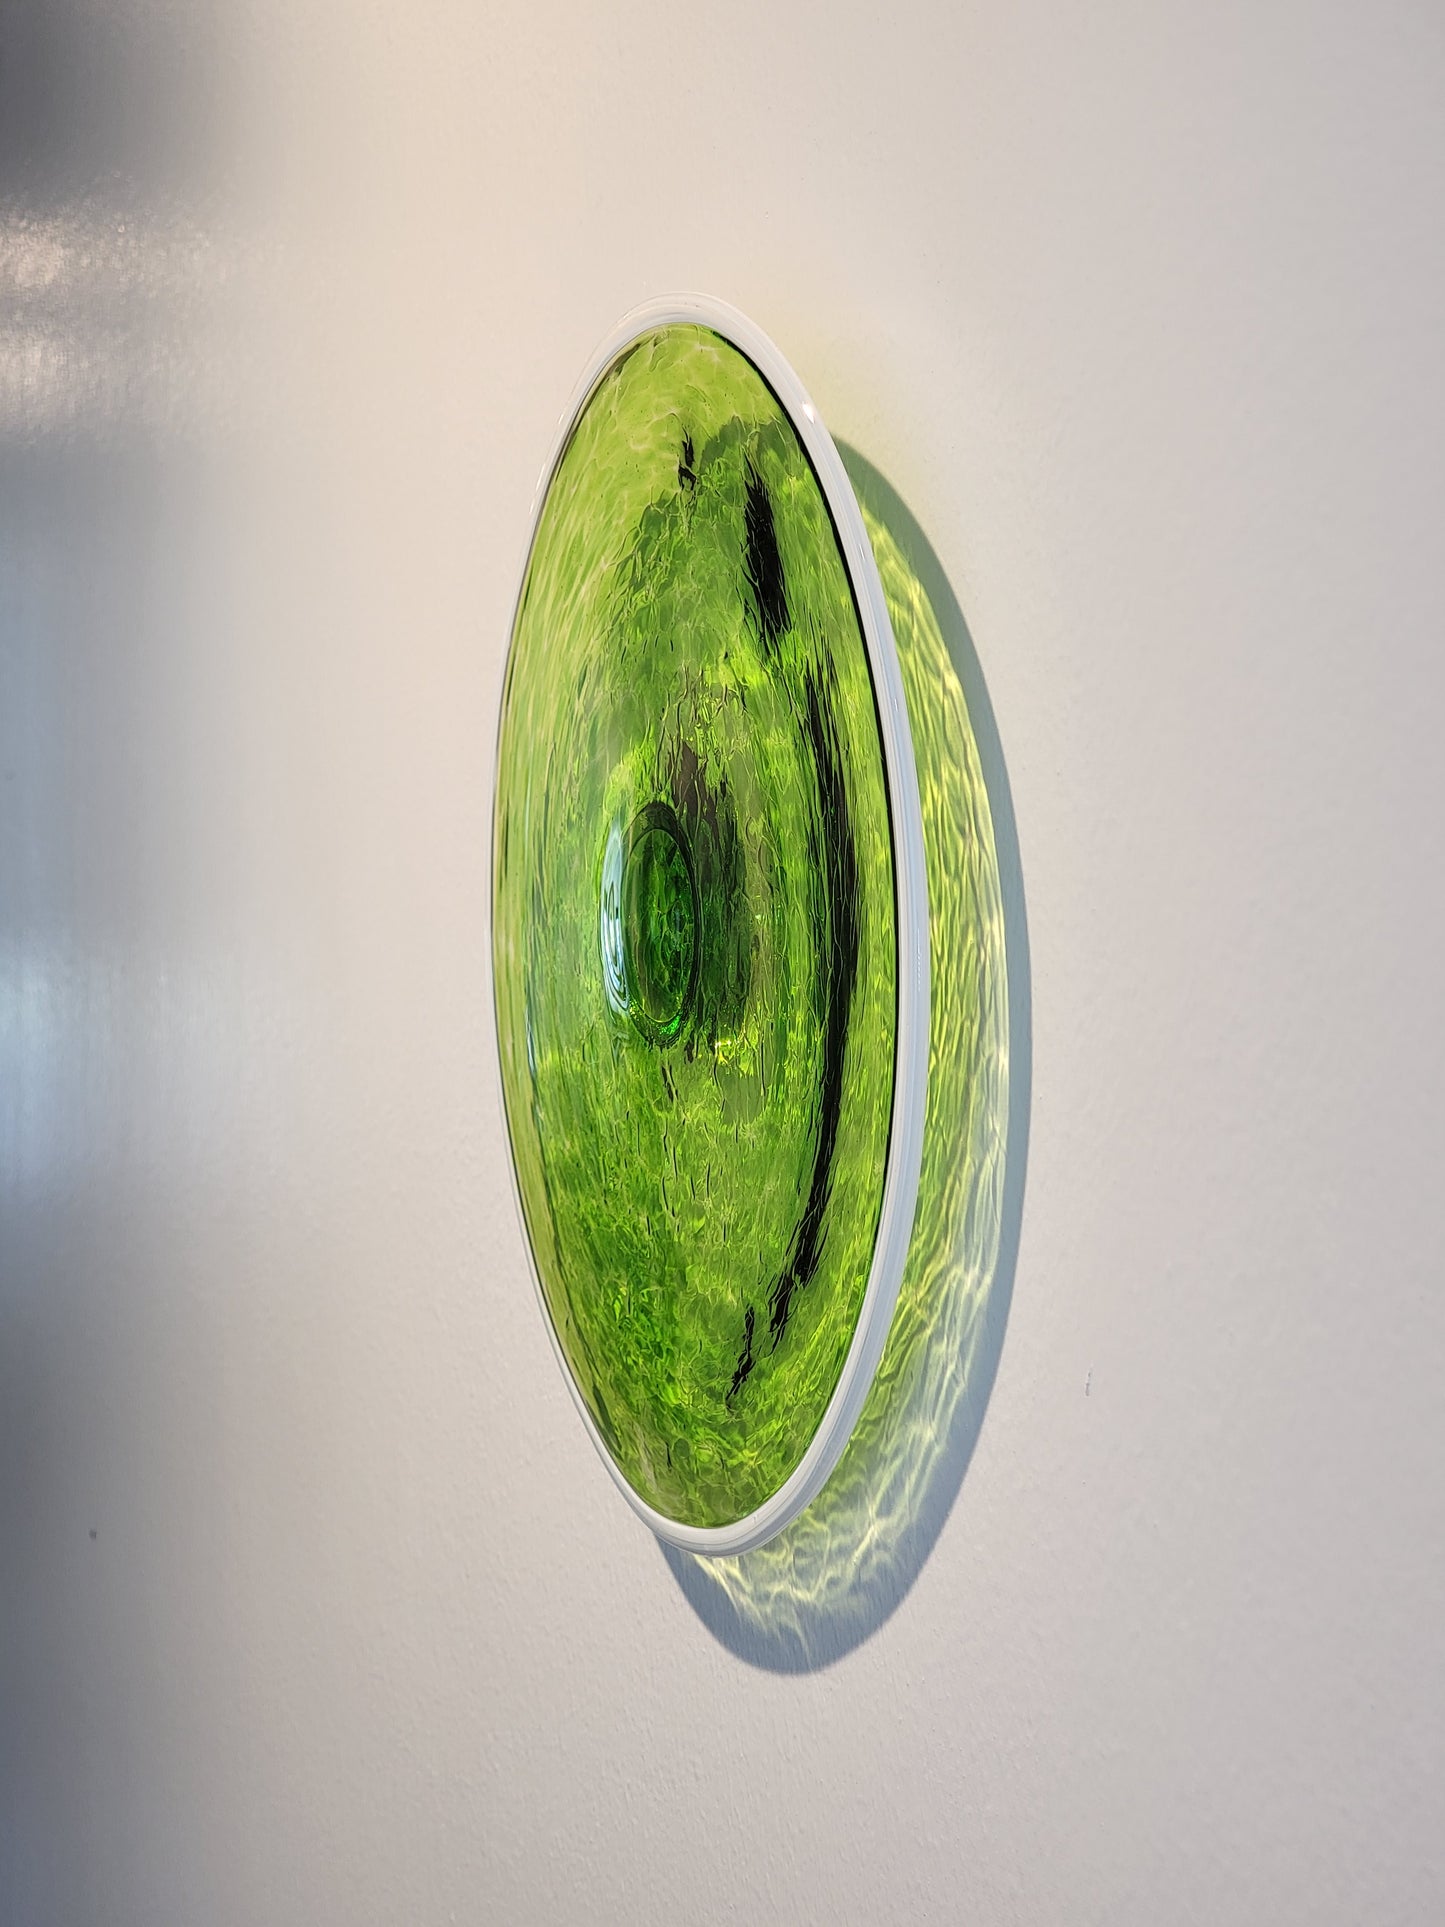 Rondel - 9" Green with White Rim